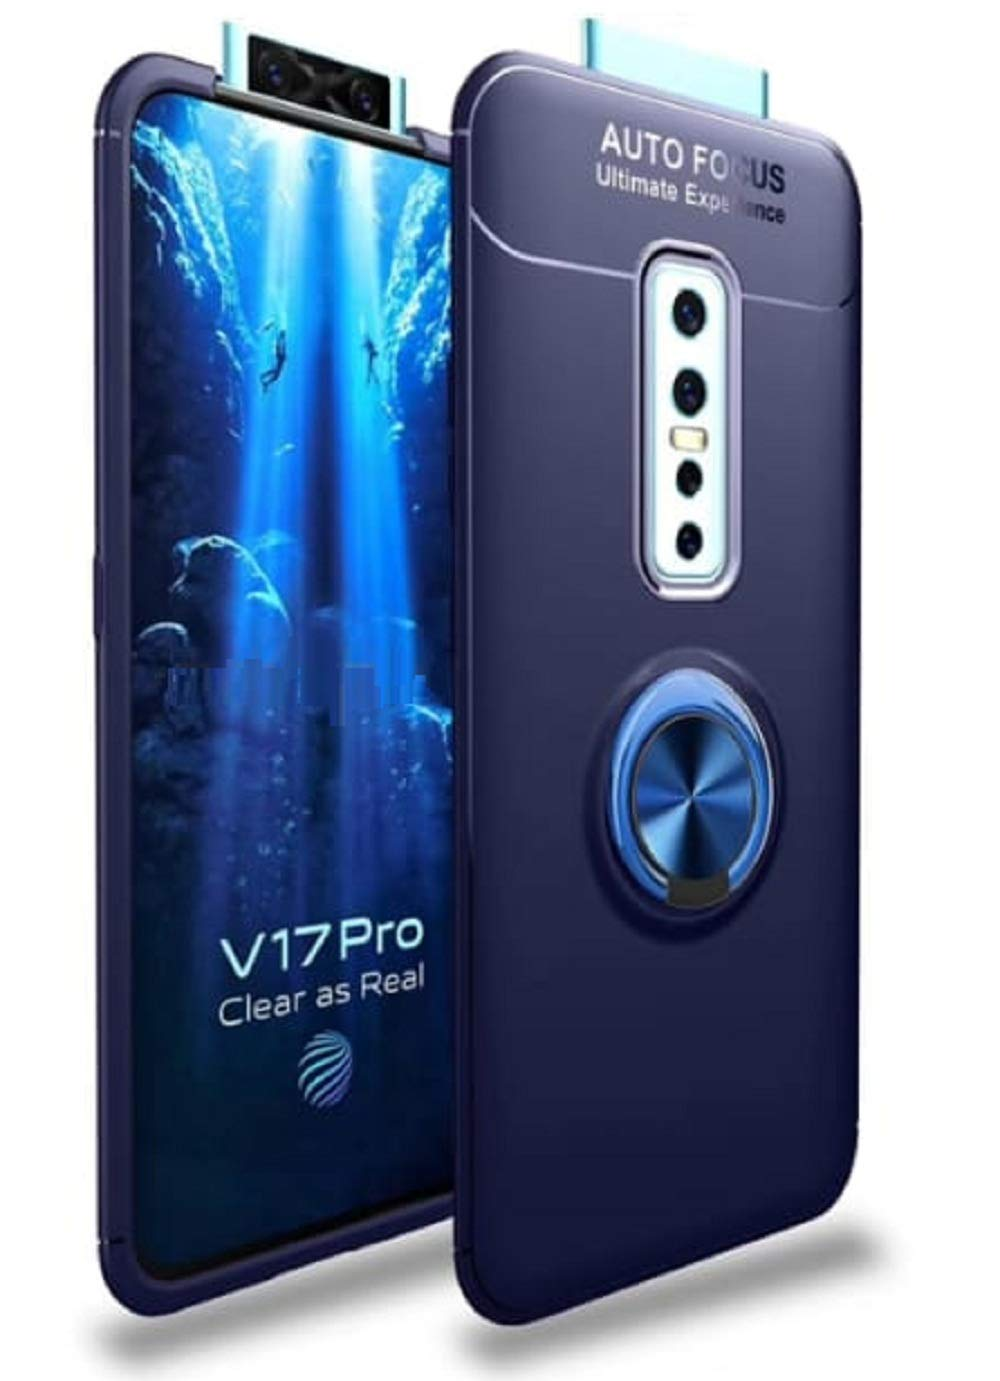 Vivo V17 Pro – What Can it Do For You?